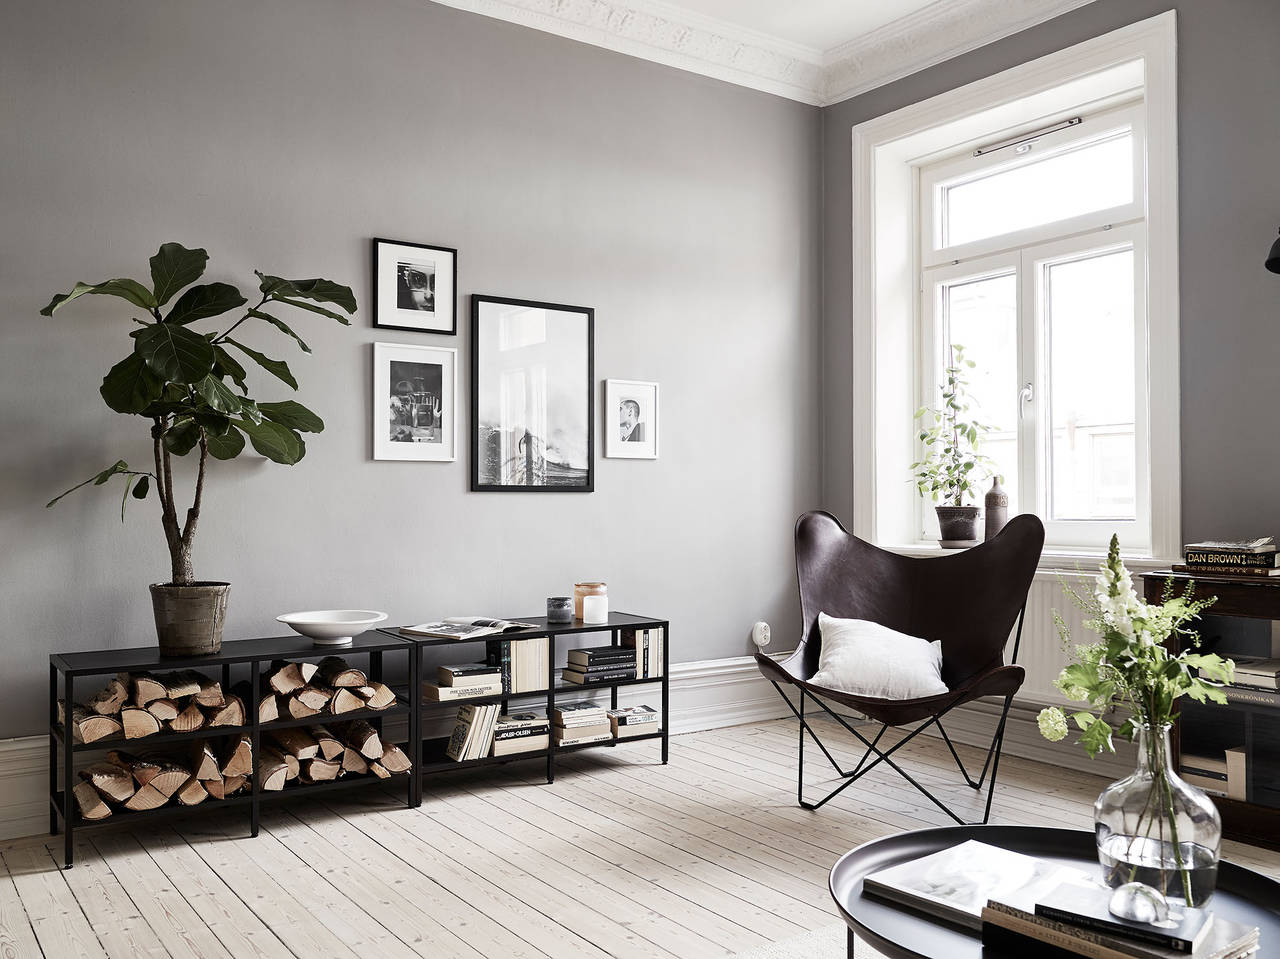 Trendesso: Interesting and charming scandinavian home